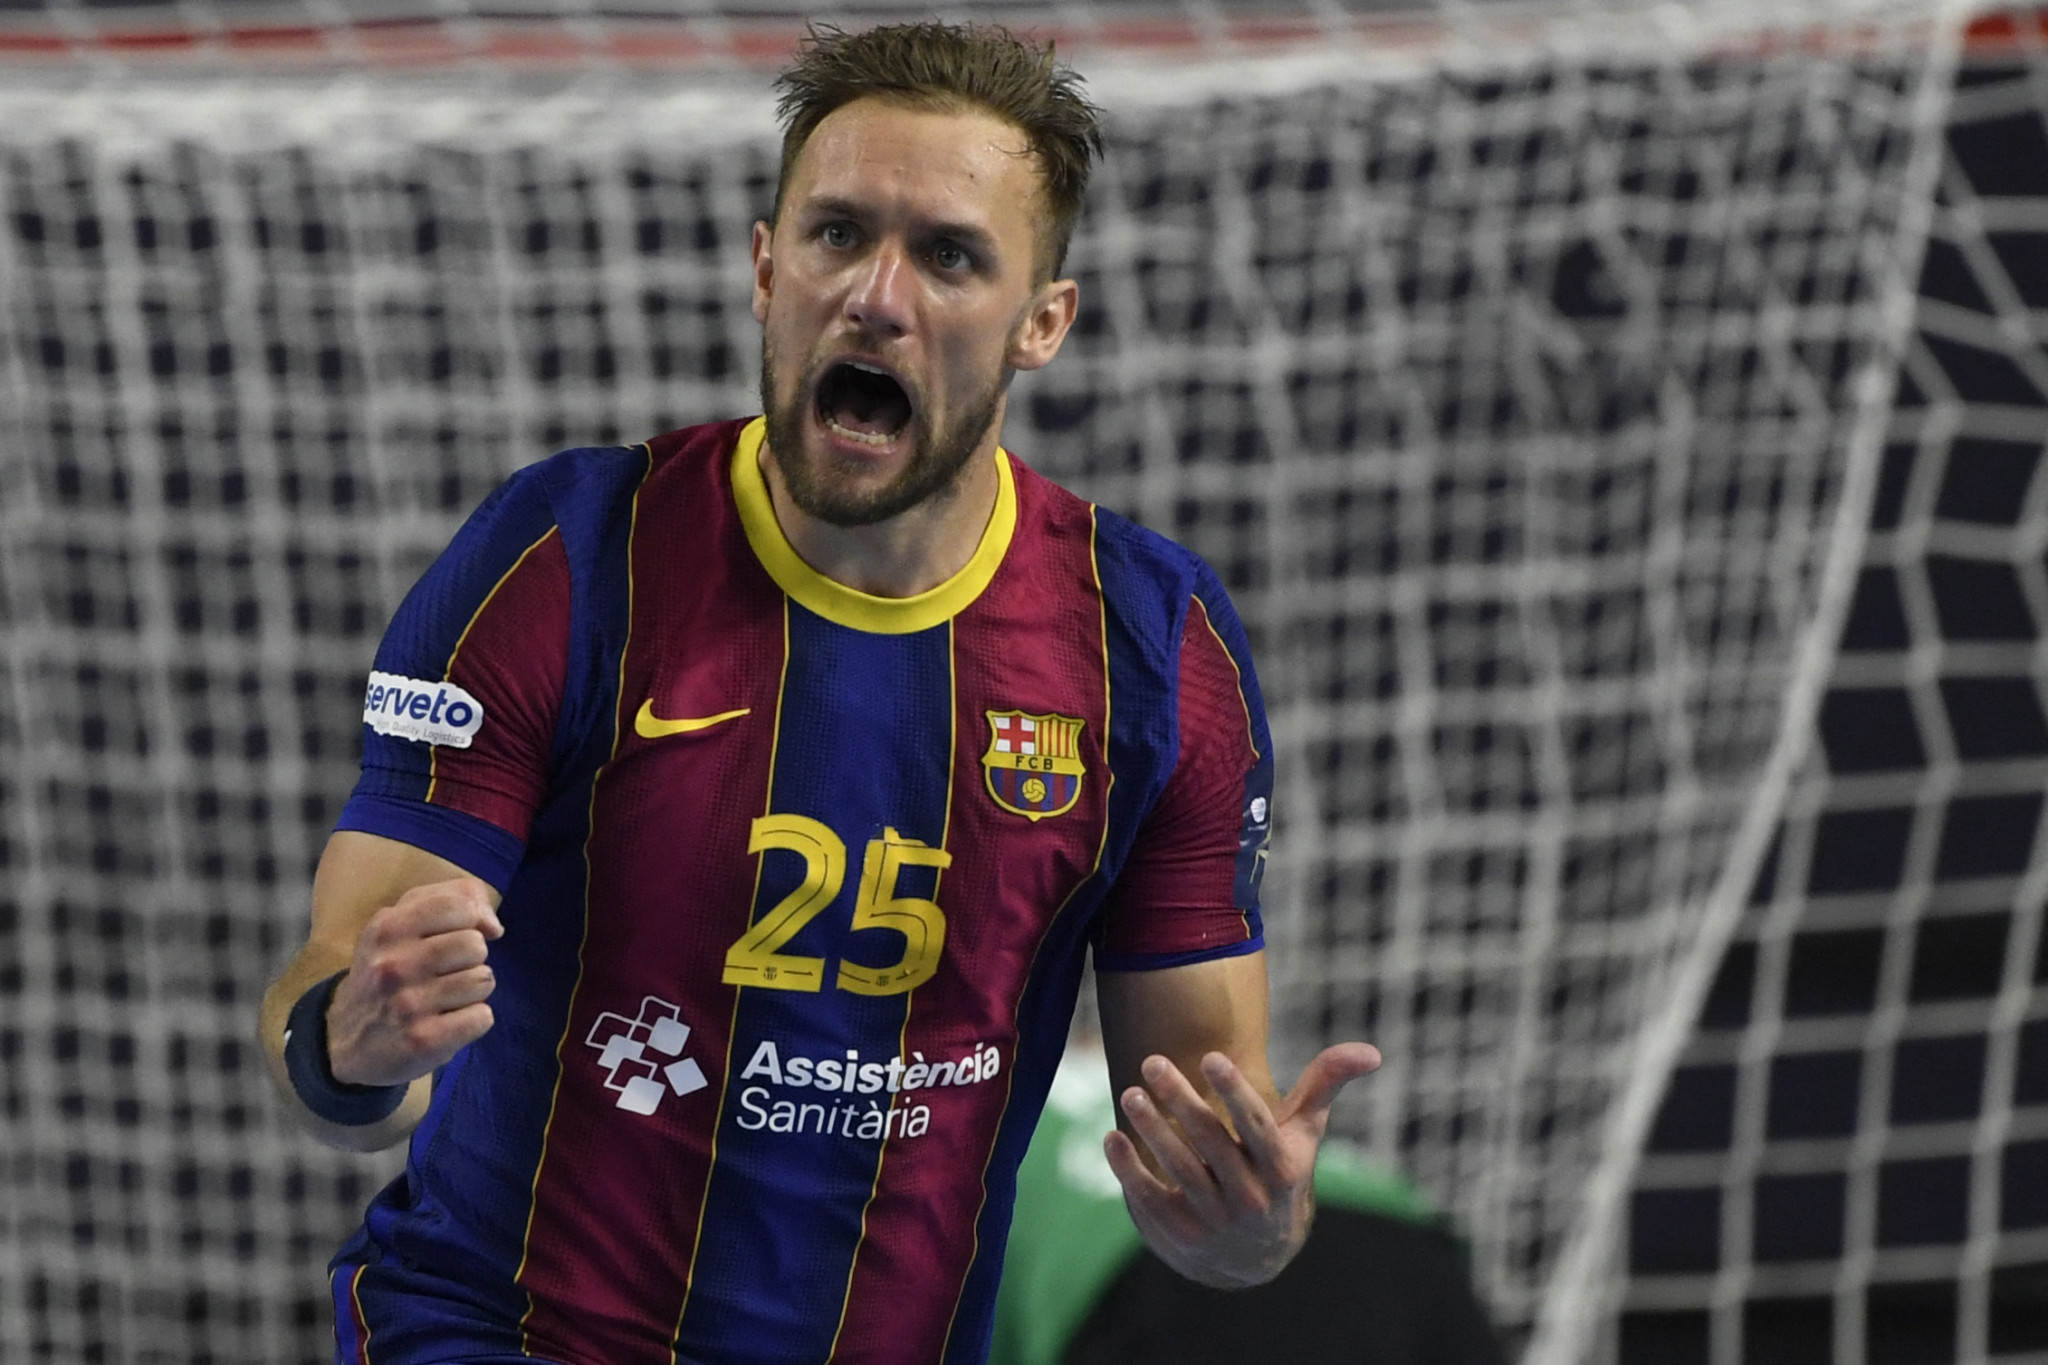 Barcelona Handbol are due to face HC Motor ©Getty Images